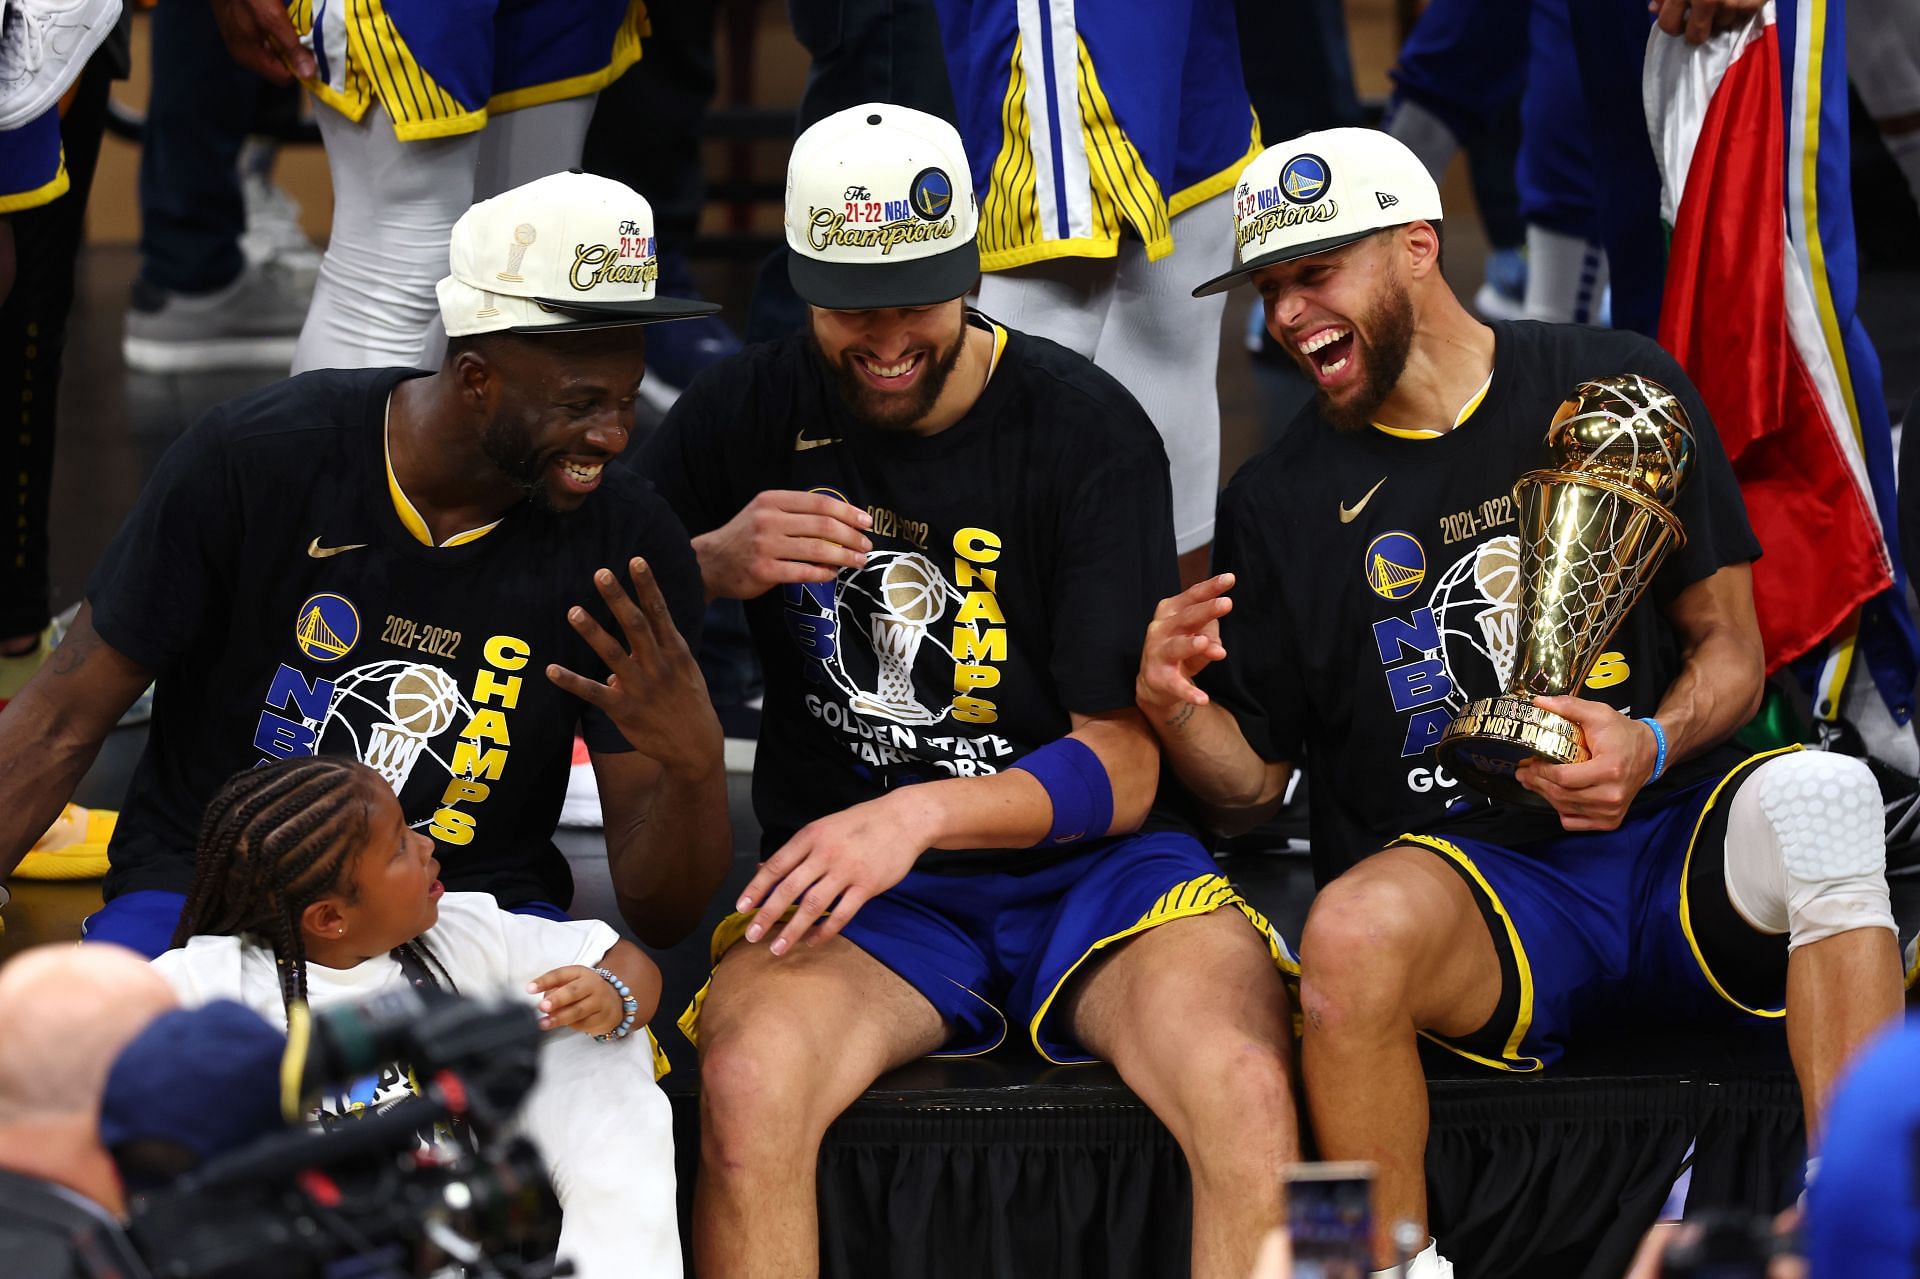 Draymond Green, Klay Thompson and Stephen Curry of the Golden State Warriors laugh together.